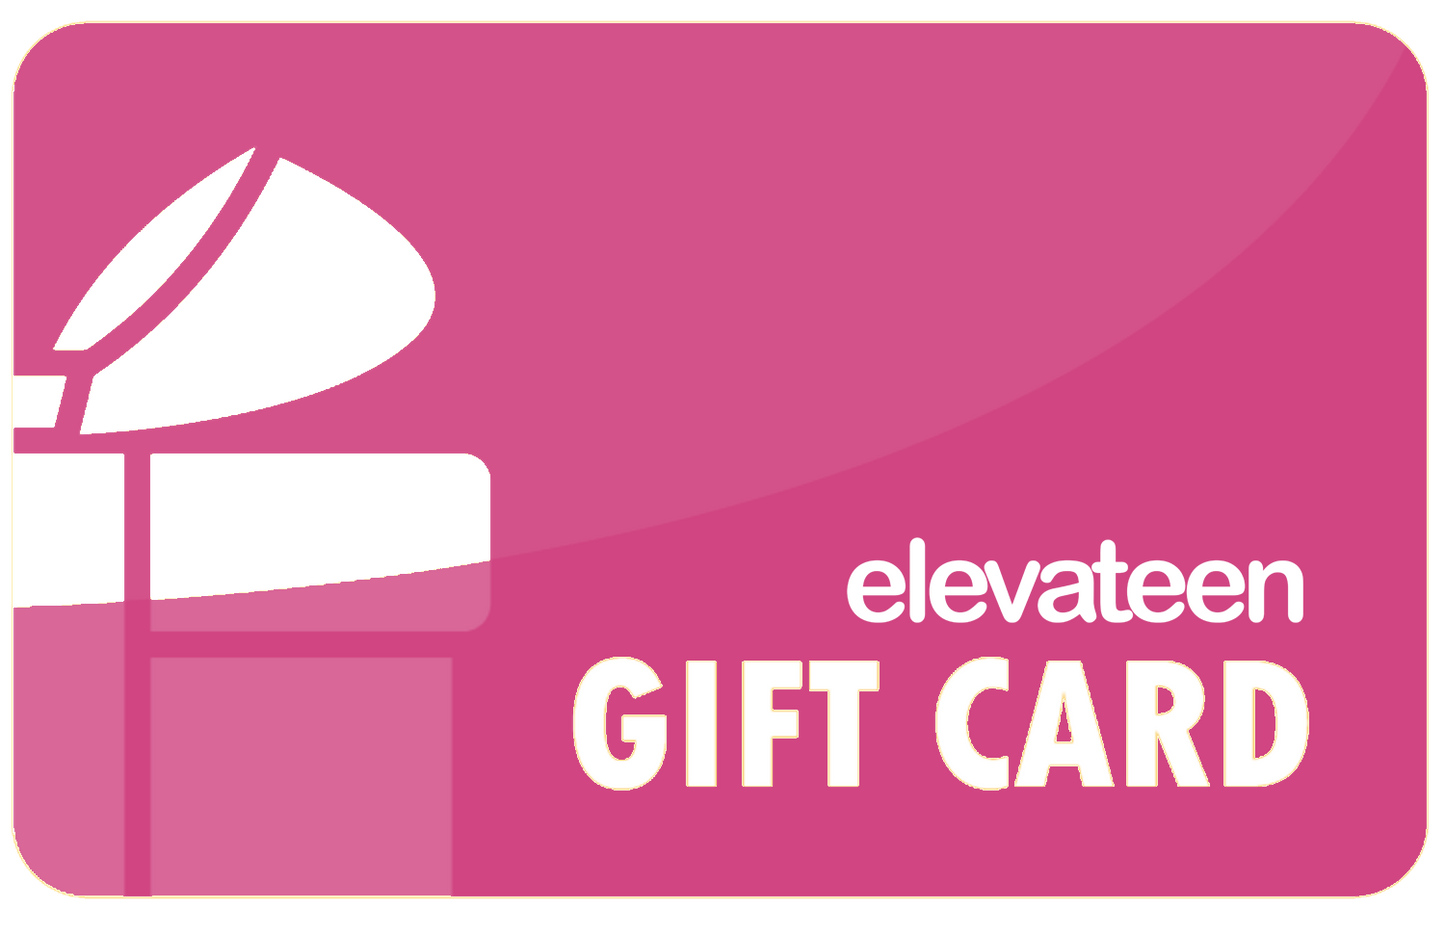 elevateen.com gift card - Gymnastics Apparel for kids, teens, and adults.